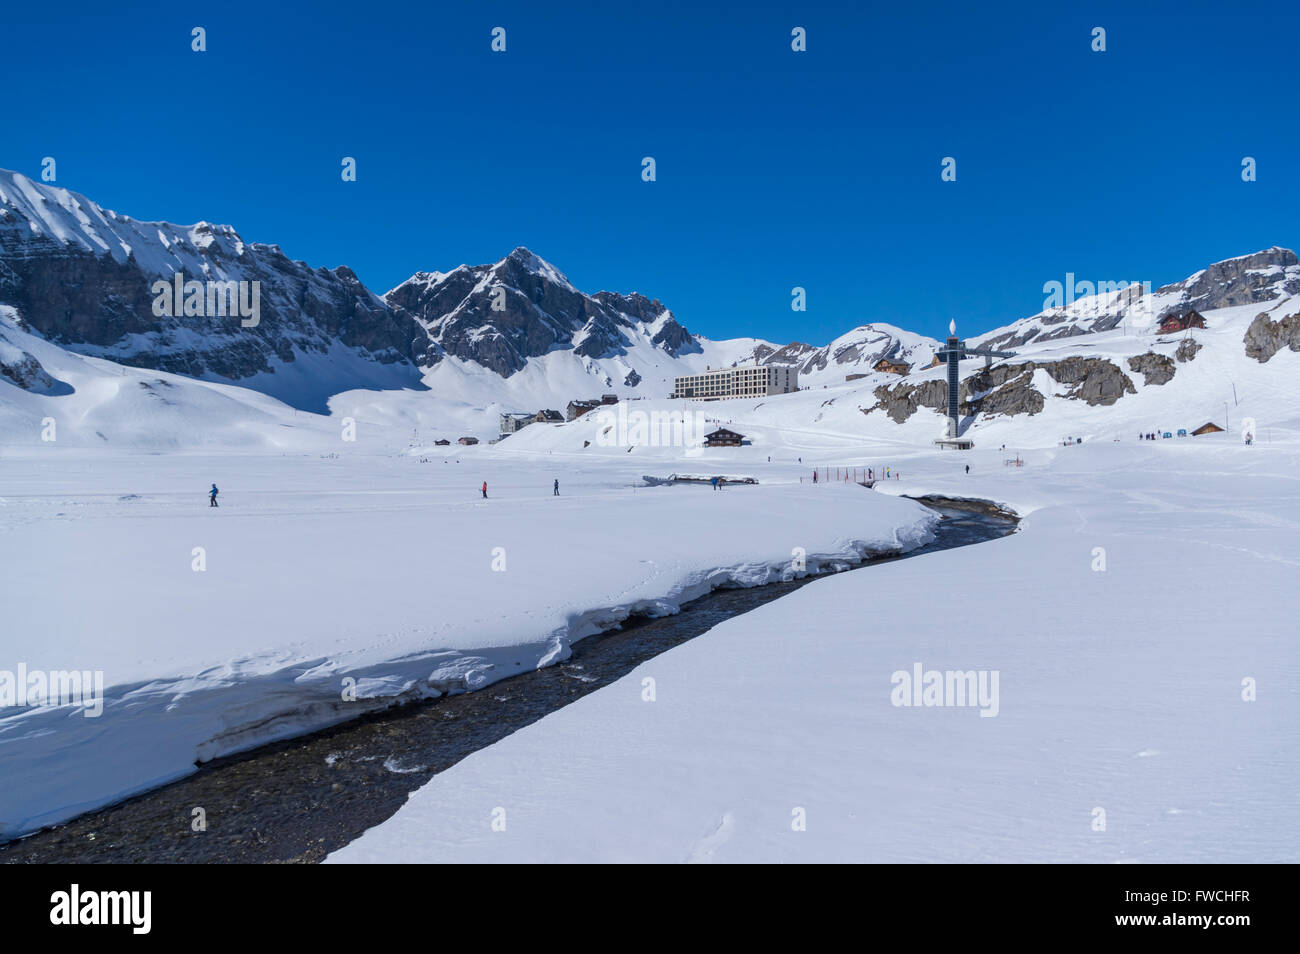 Melchsee-Frutt, a village and winter sports resort in Switzerland, surrounded by mountains, seen from a distance. Stock Photo